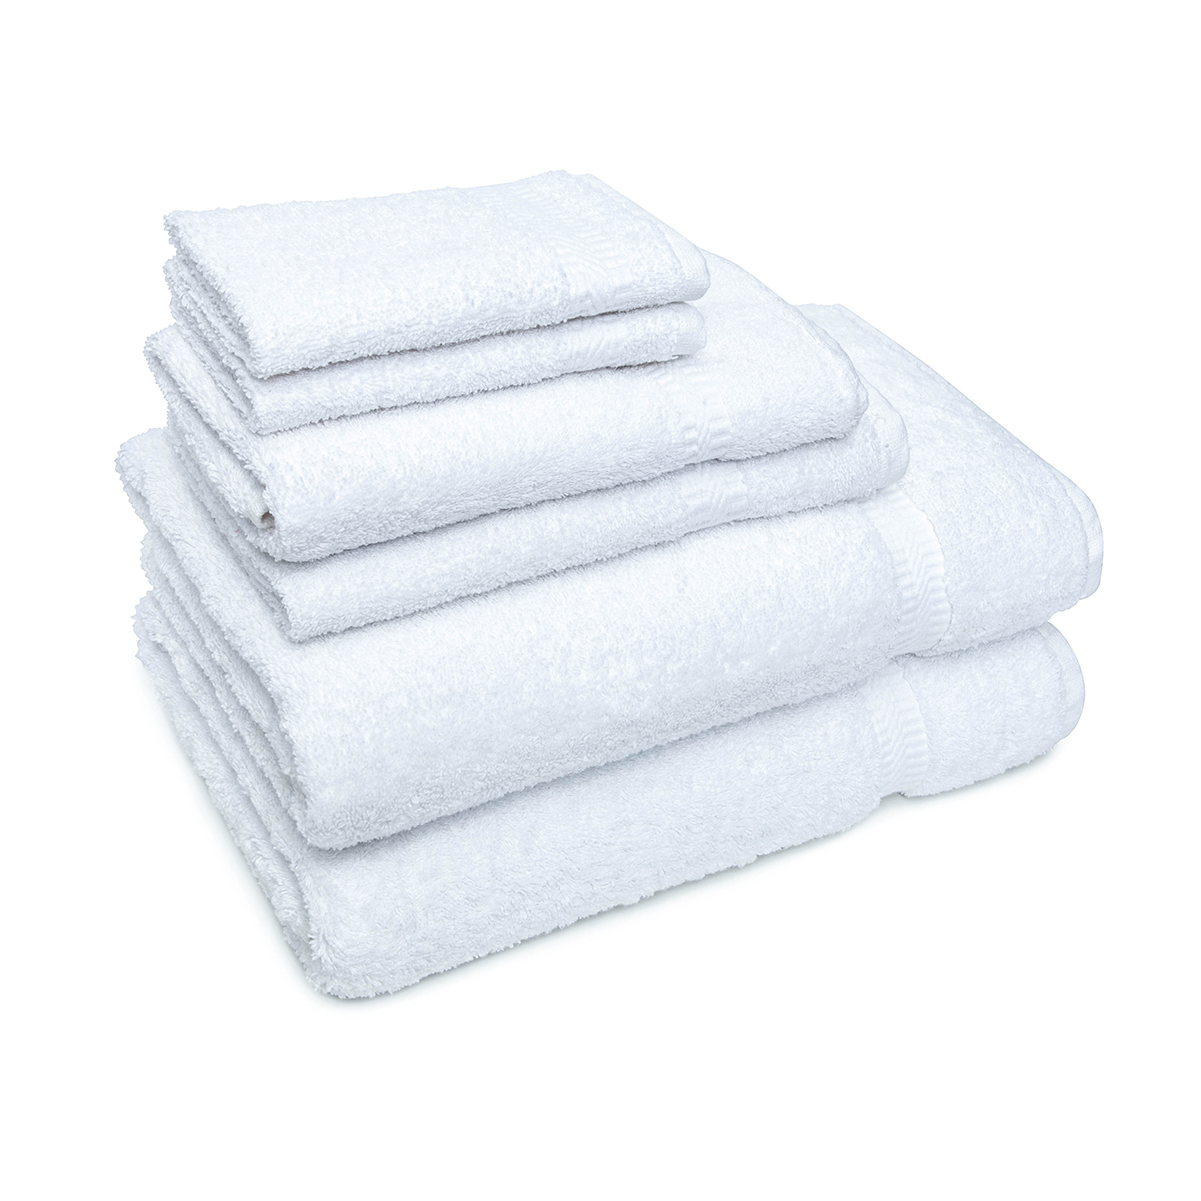 Where are the ADI Plush Hotel Towels, specifically the white guestroom towels, manufactured?